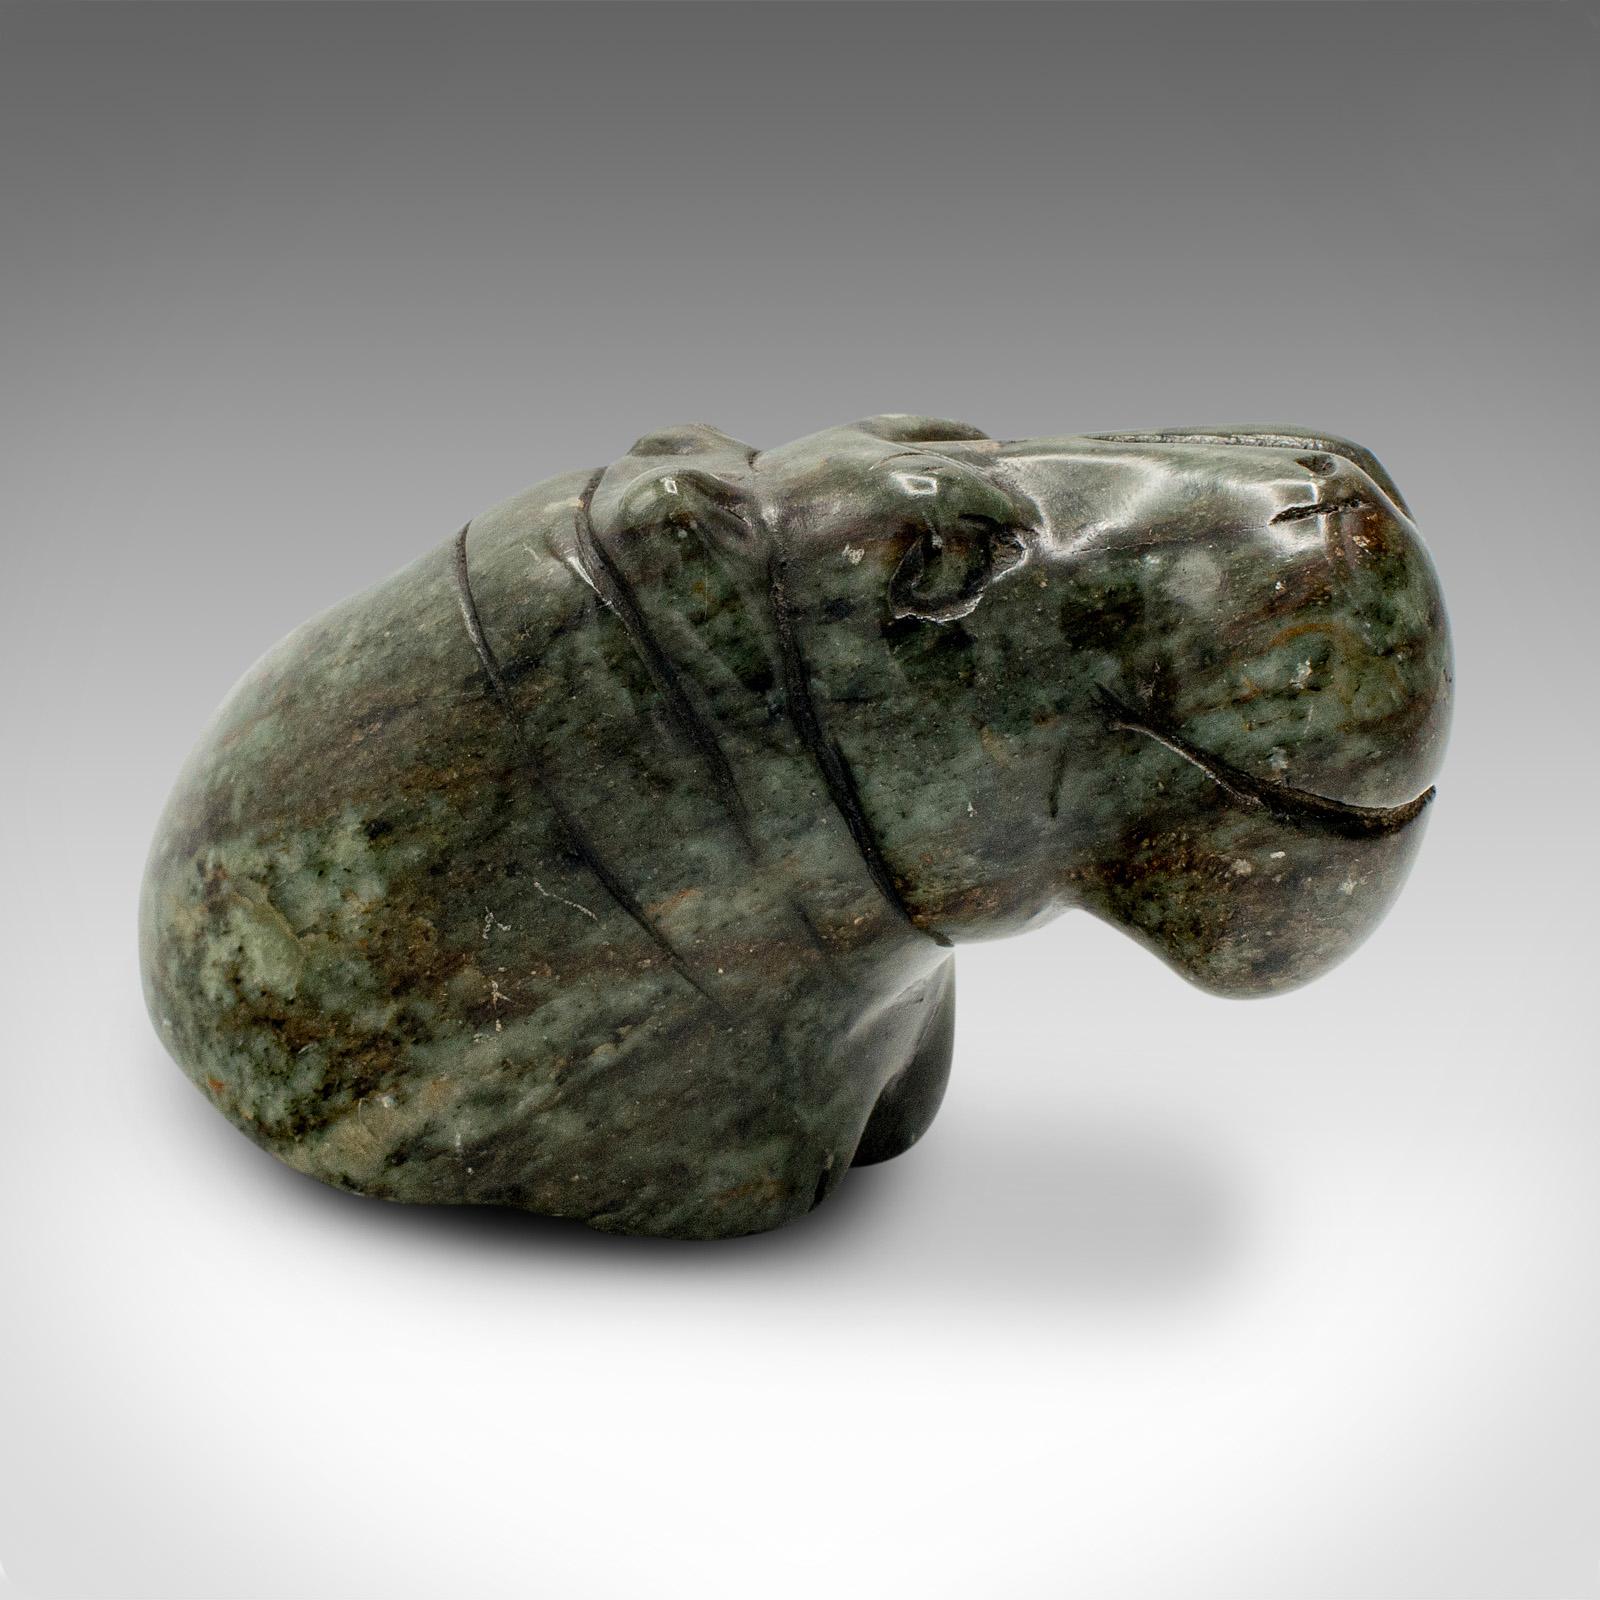 Small Antique Hippopotamus Figure, African, Soapstone, Hand Carved, Victorian In Good Condition For Sale In Hele, Devon, GB